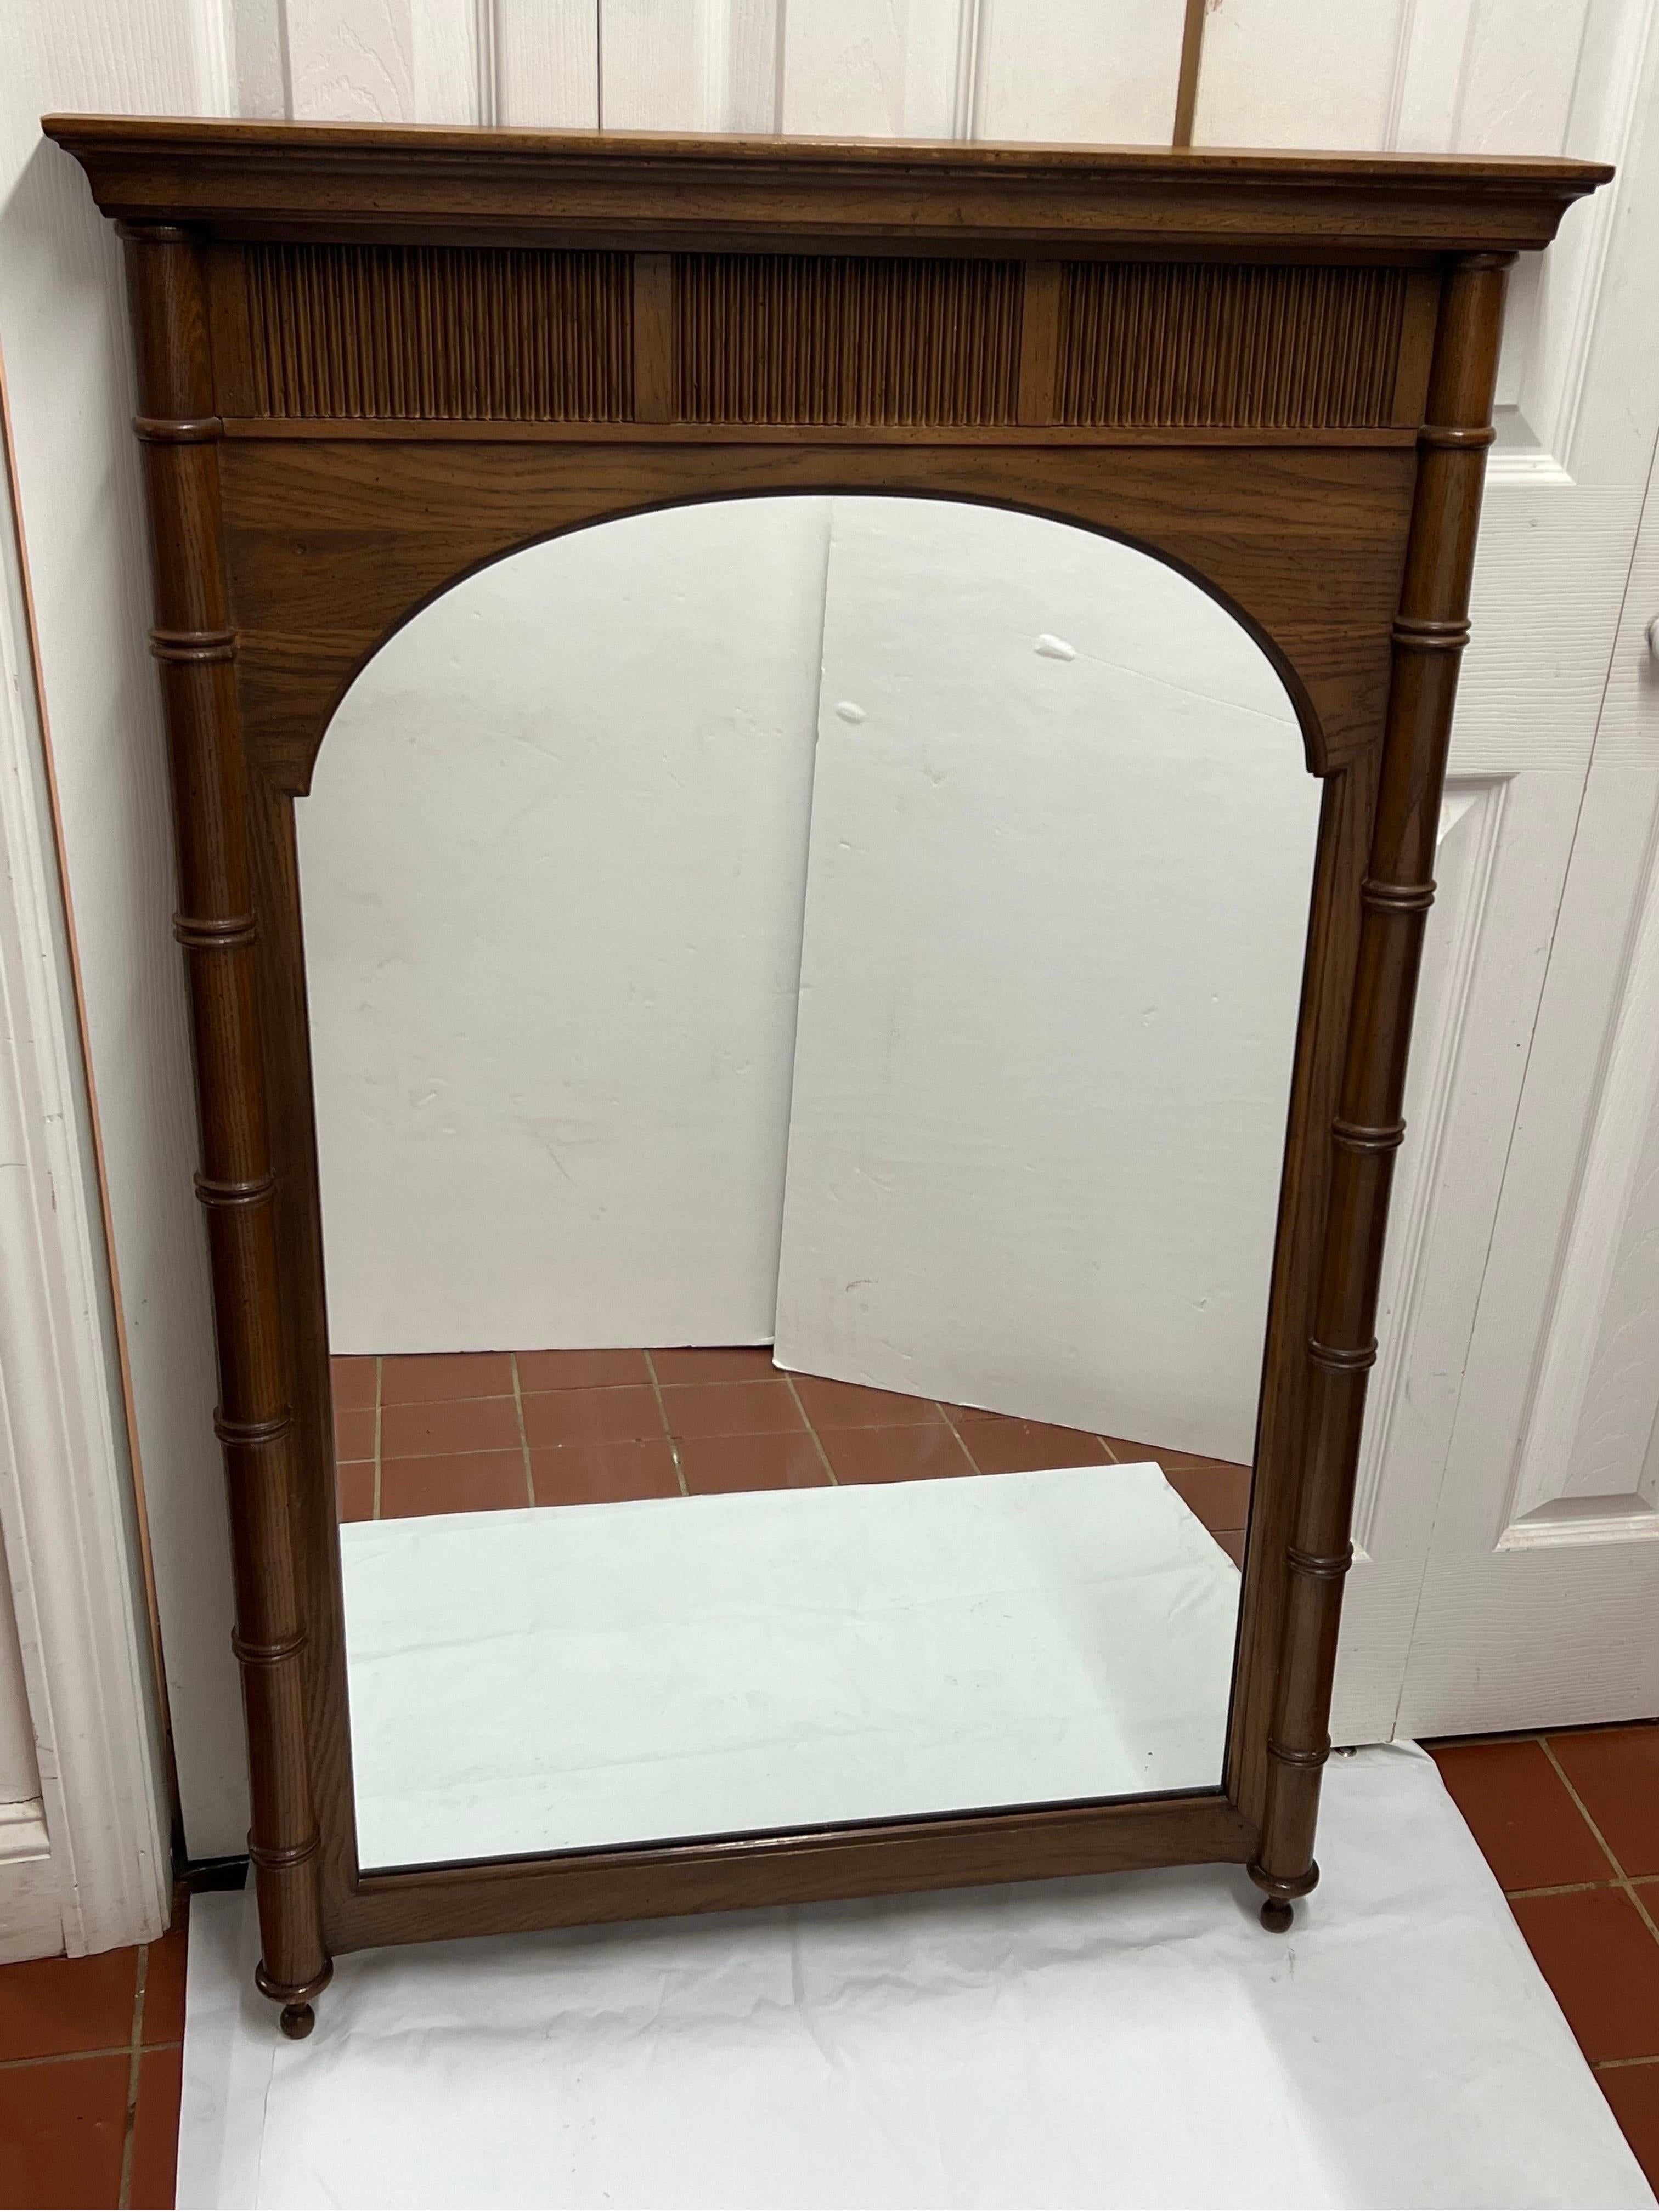 Mid Century Faux Bamboo Wooden Mirror
Perfect for over a vanity in a bathroom. 
